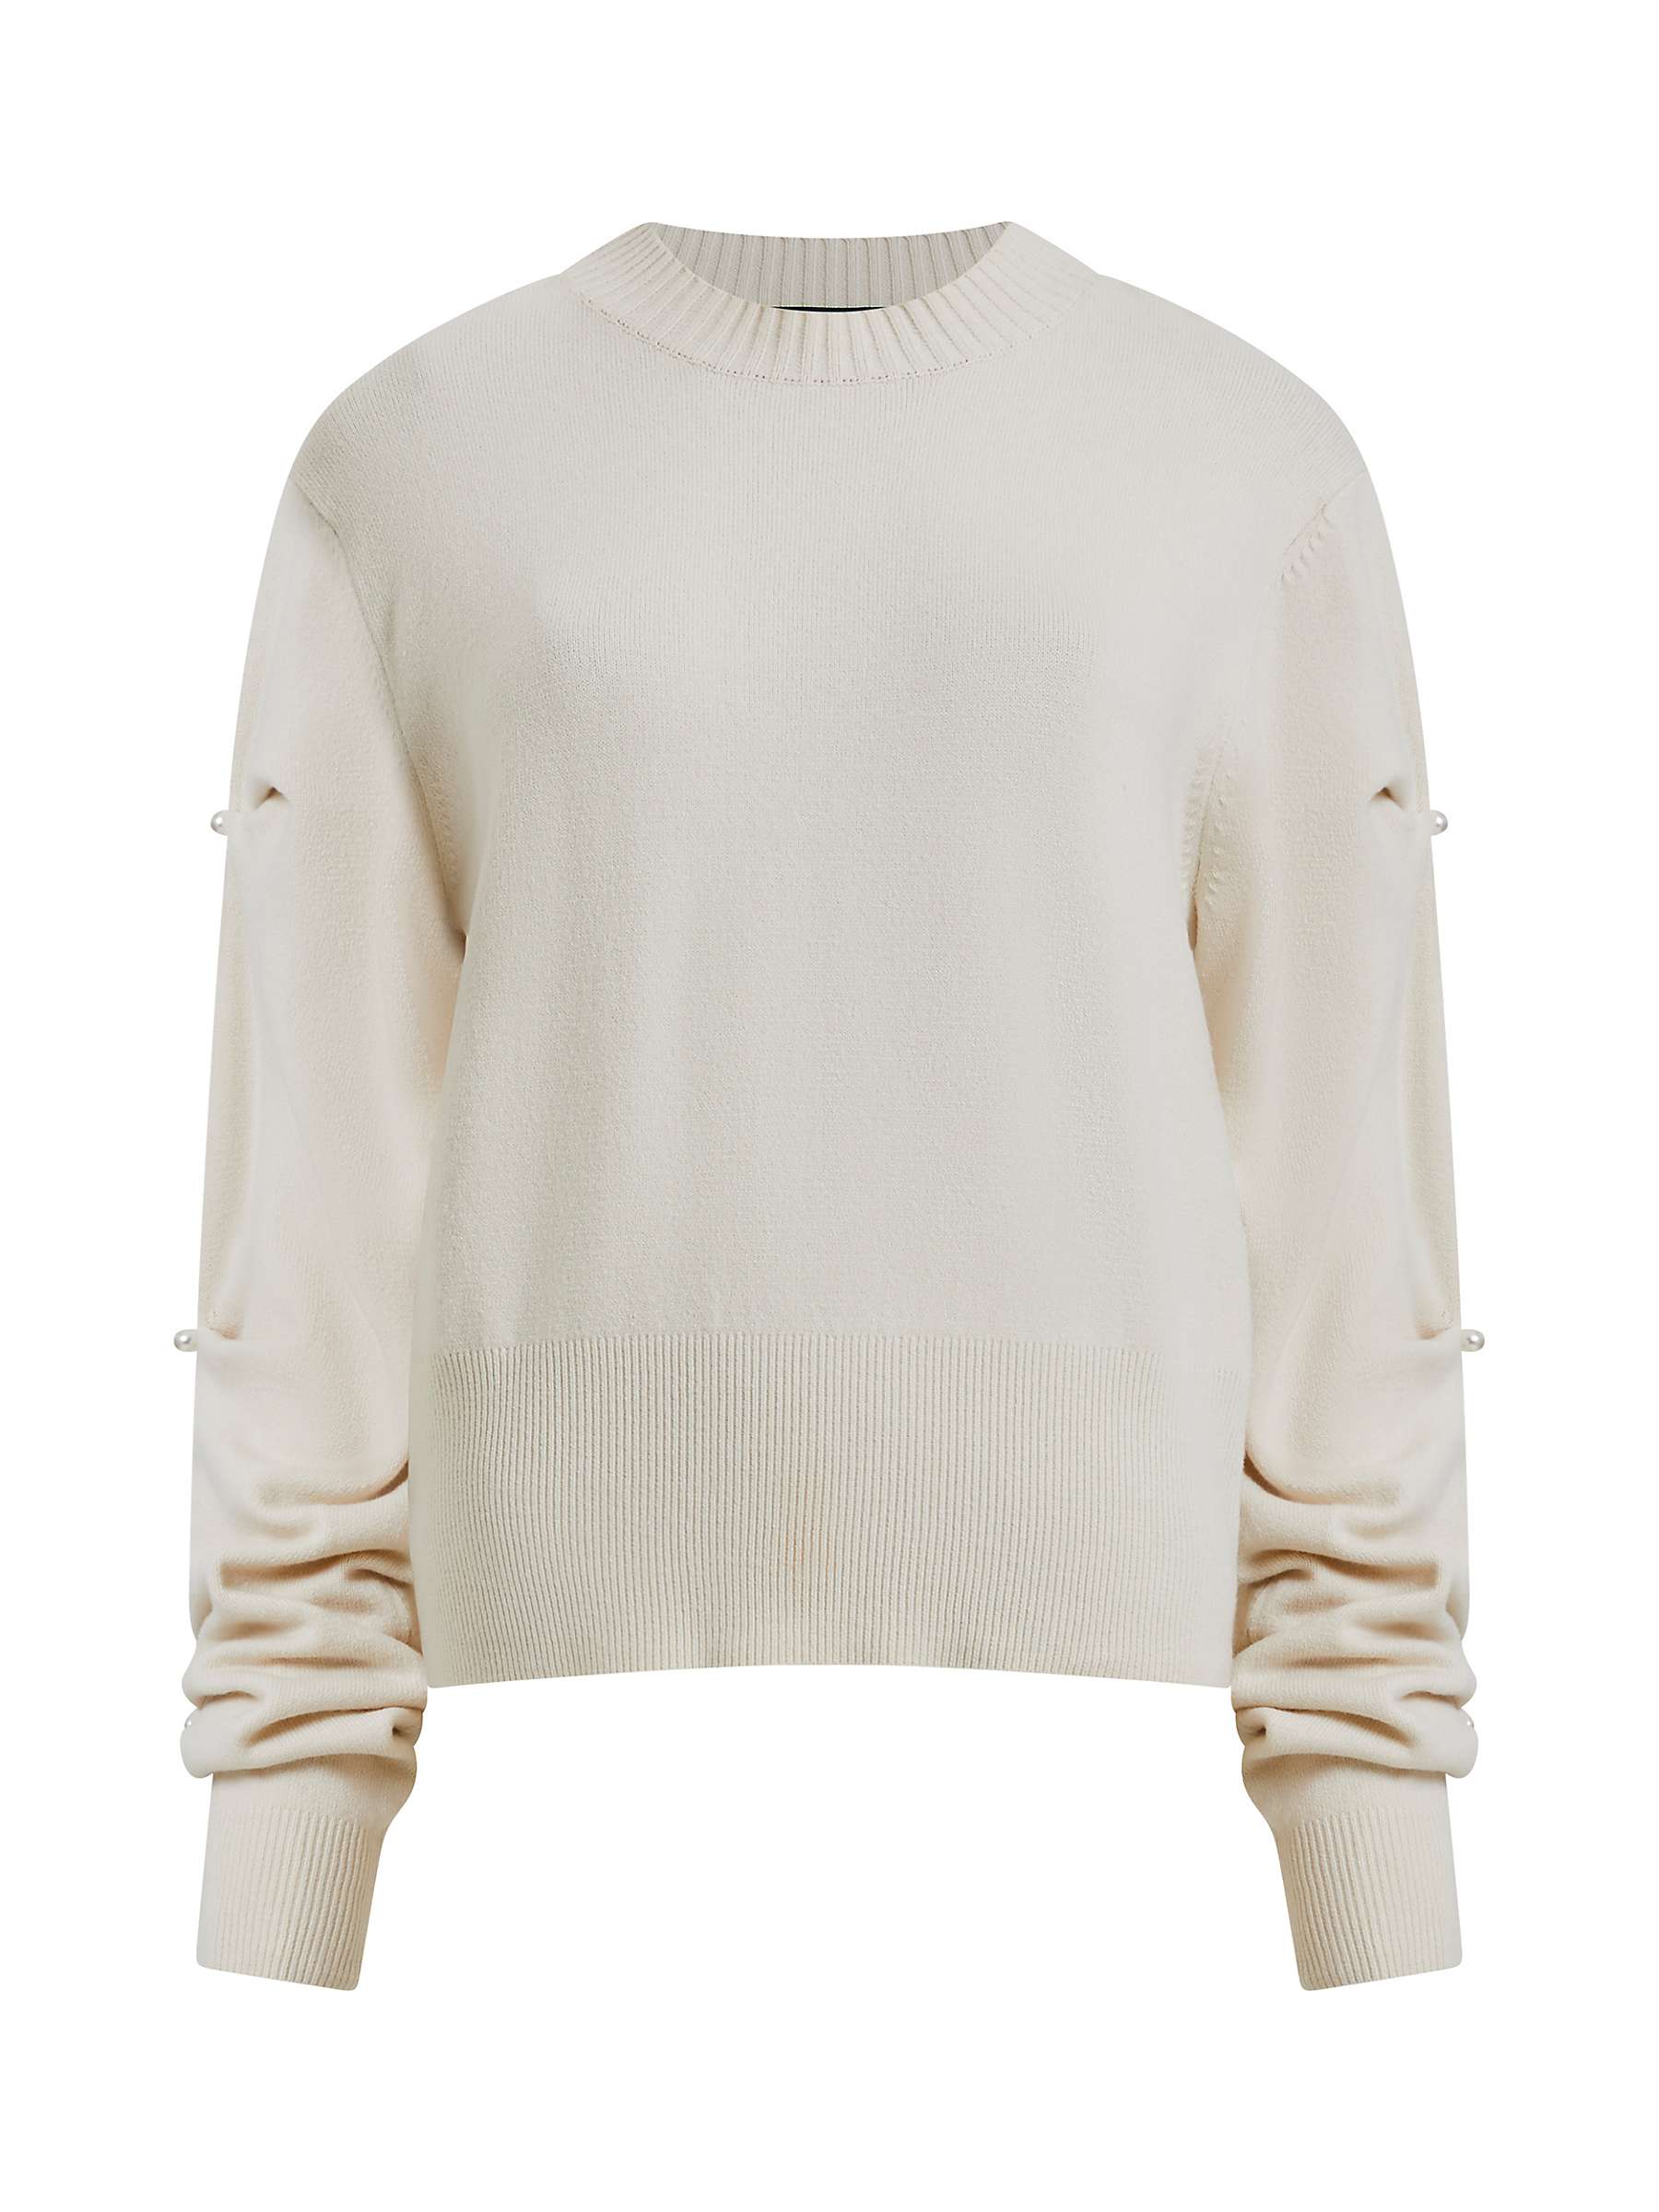 Buy French Connection Babysoft Embroidered Jumper, Classic Cream Online at johnlewis.com